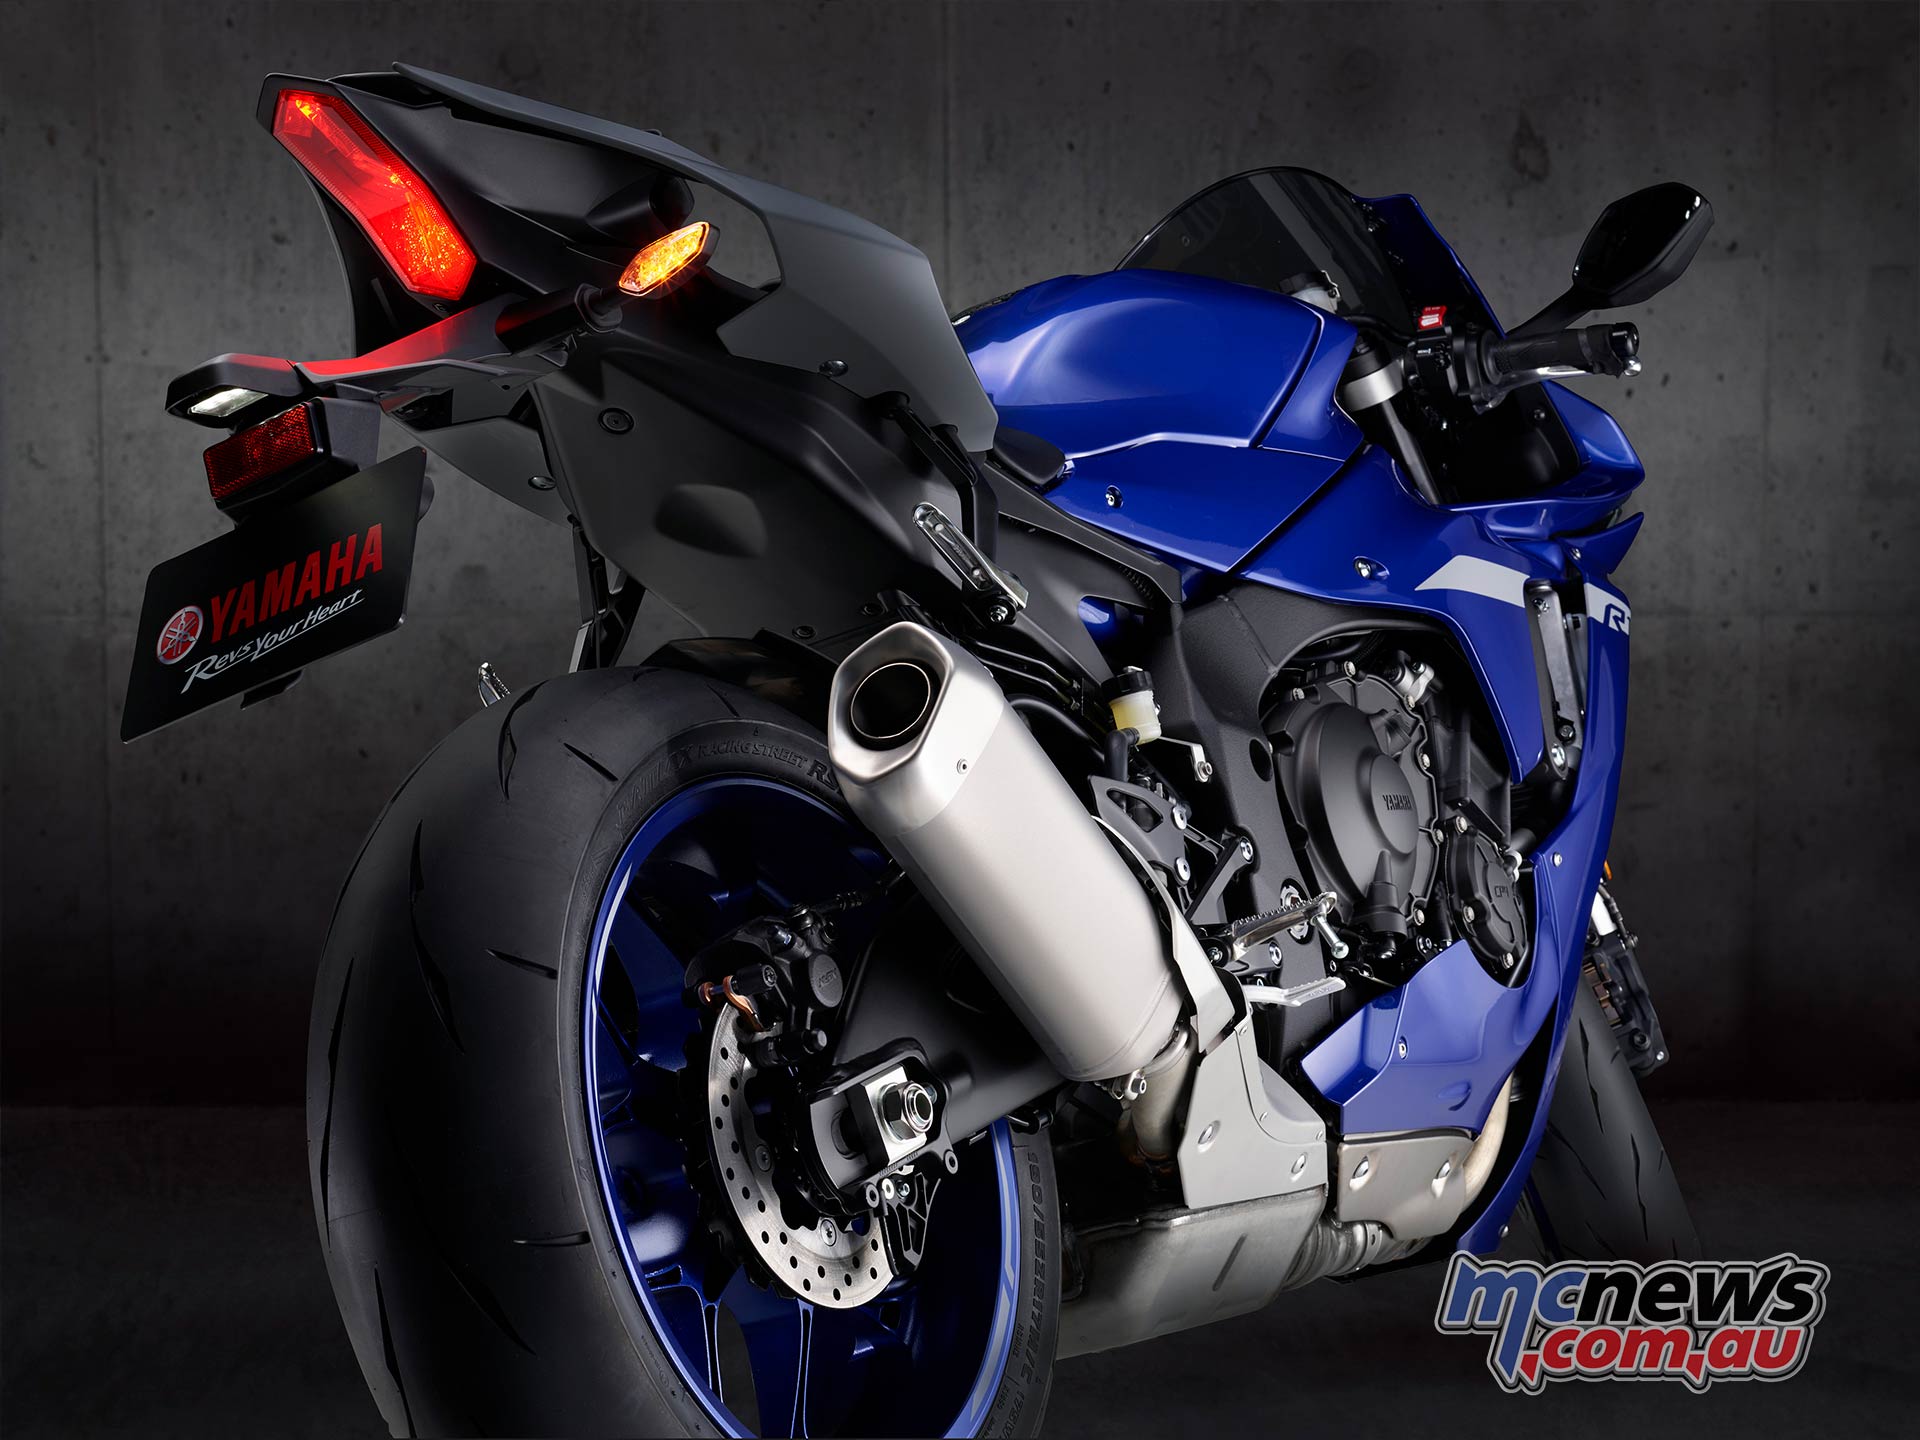 Yamaha YZF R1 And 2020 YZF R1M Here Now. Motorcycle News, Sport And Reviews